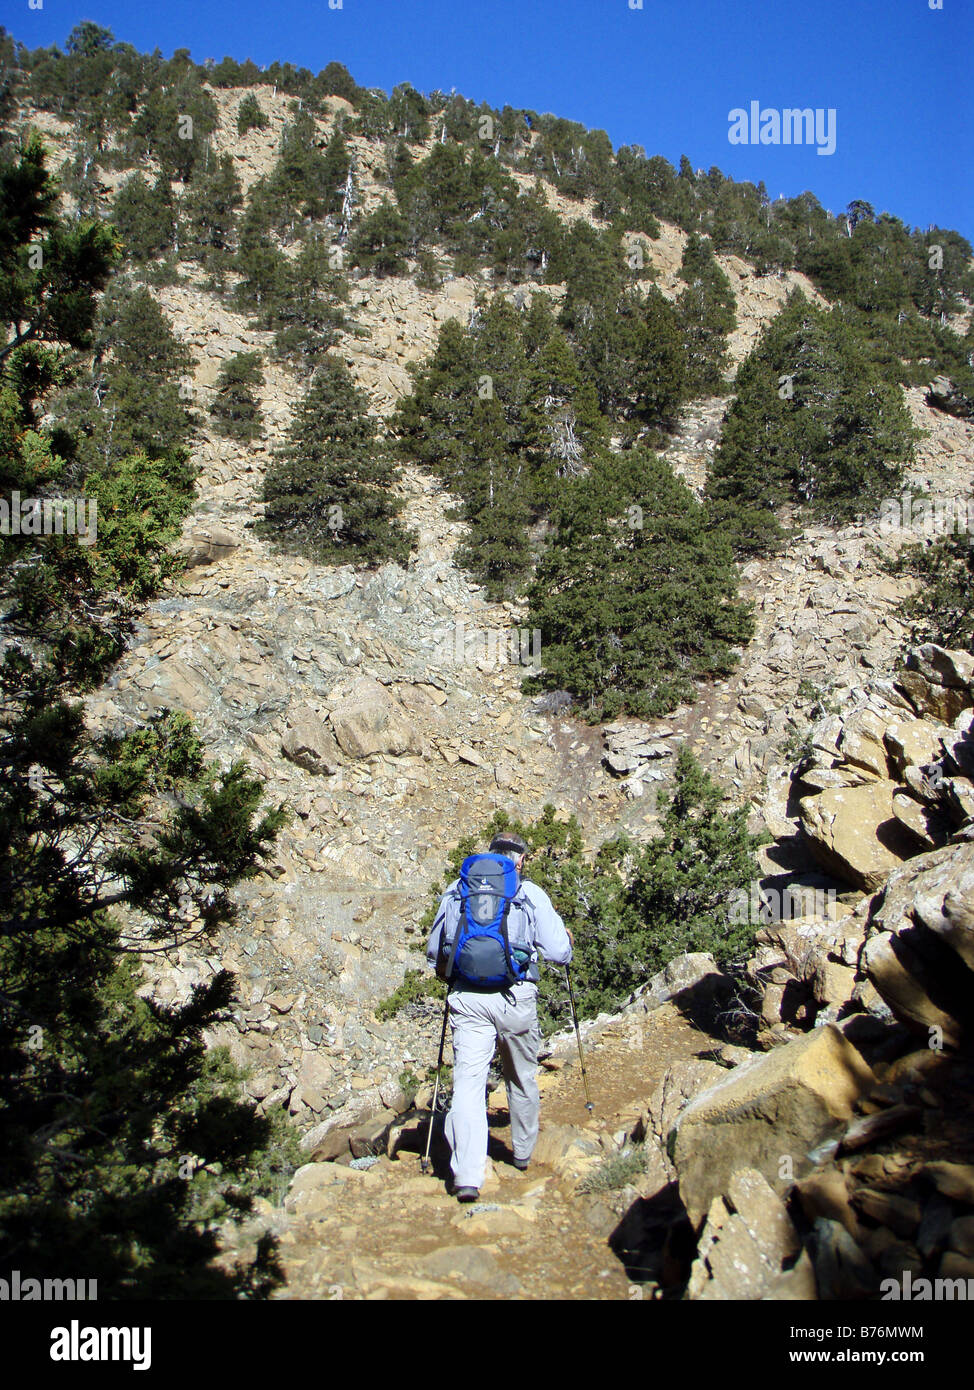 Man Hiking in Troodos Mountains Cyprus in Sunshine on Adventure Holiday Trip Stock Photo